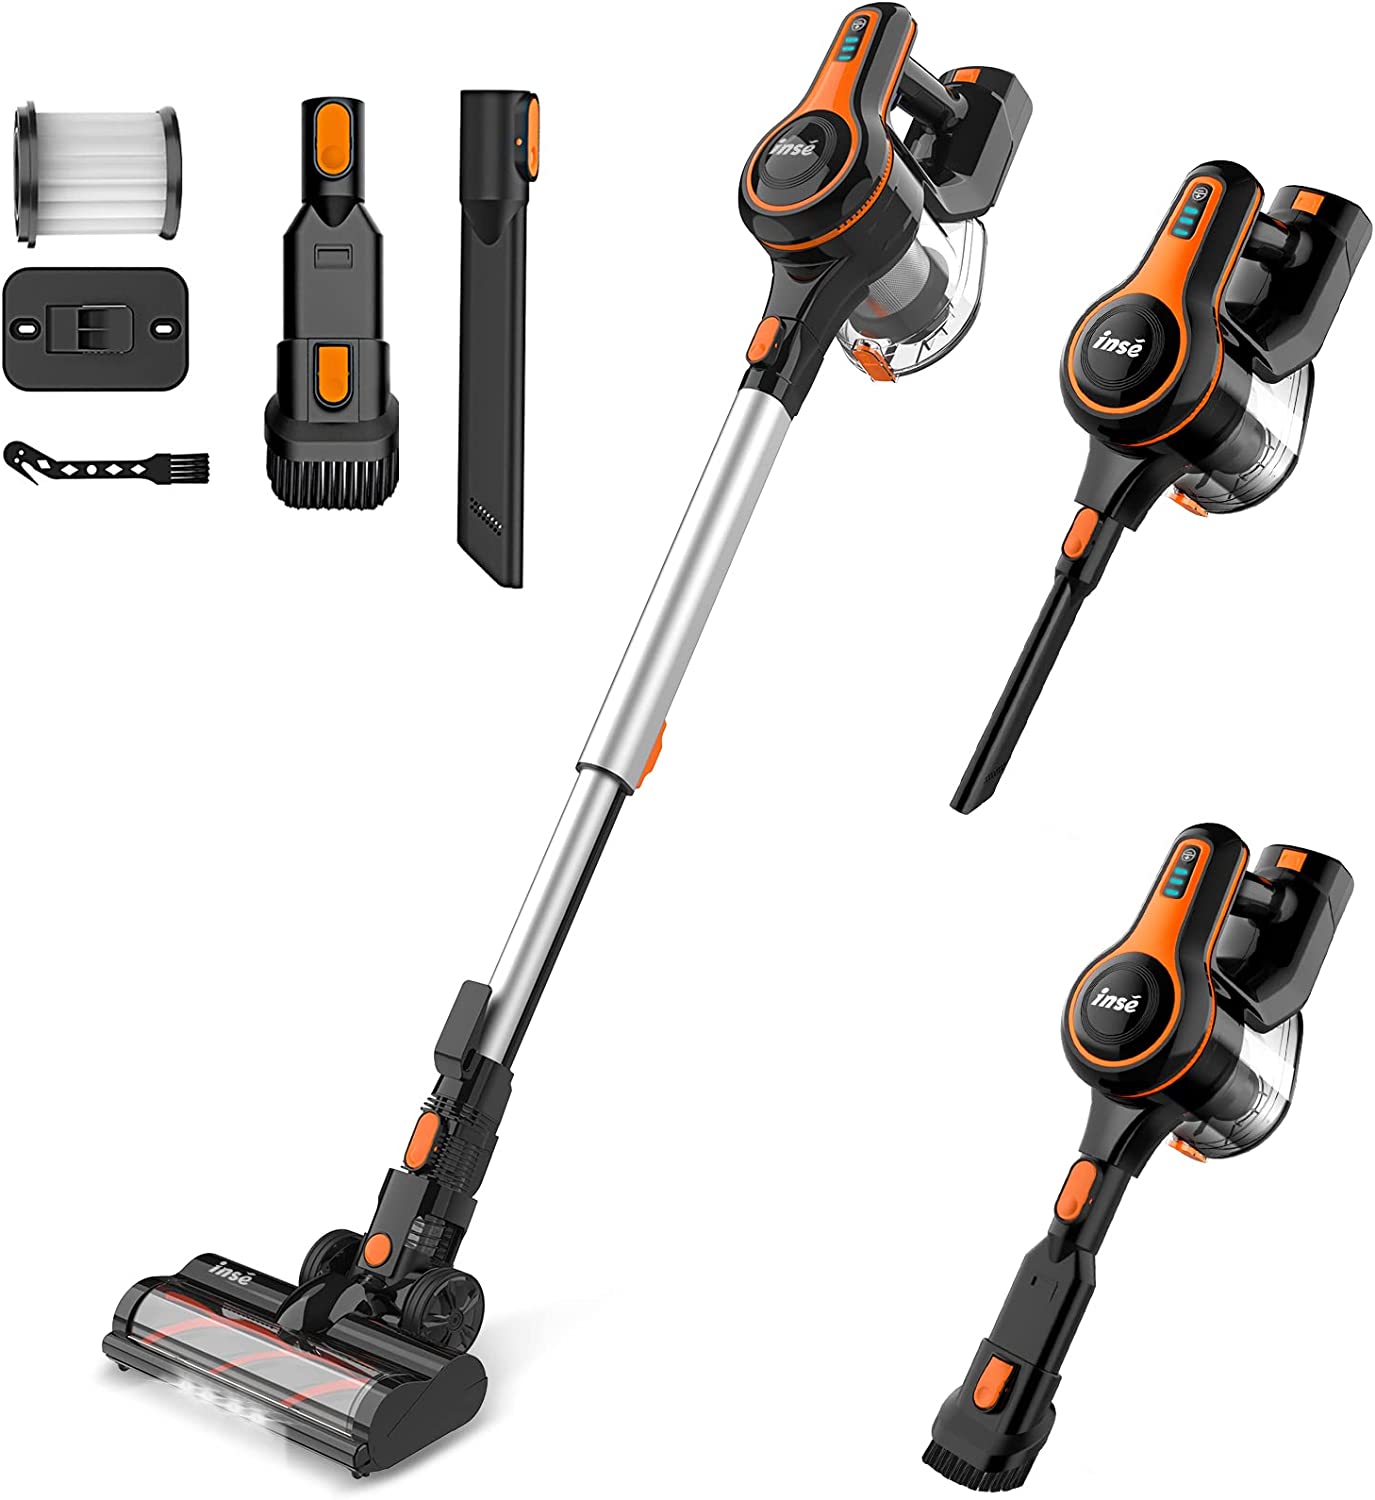 INSE Cordless Vacuum Cleaner, 25Kpa Powerful Stick Vacuum, 6-in-1 Rechargeable Vacuum with 2500m-Ah Battery Up to 45mins Runtime, Lightweight Vacuum Cleaner for Pet Hair Har$129.99